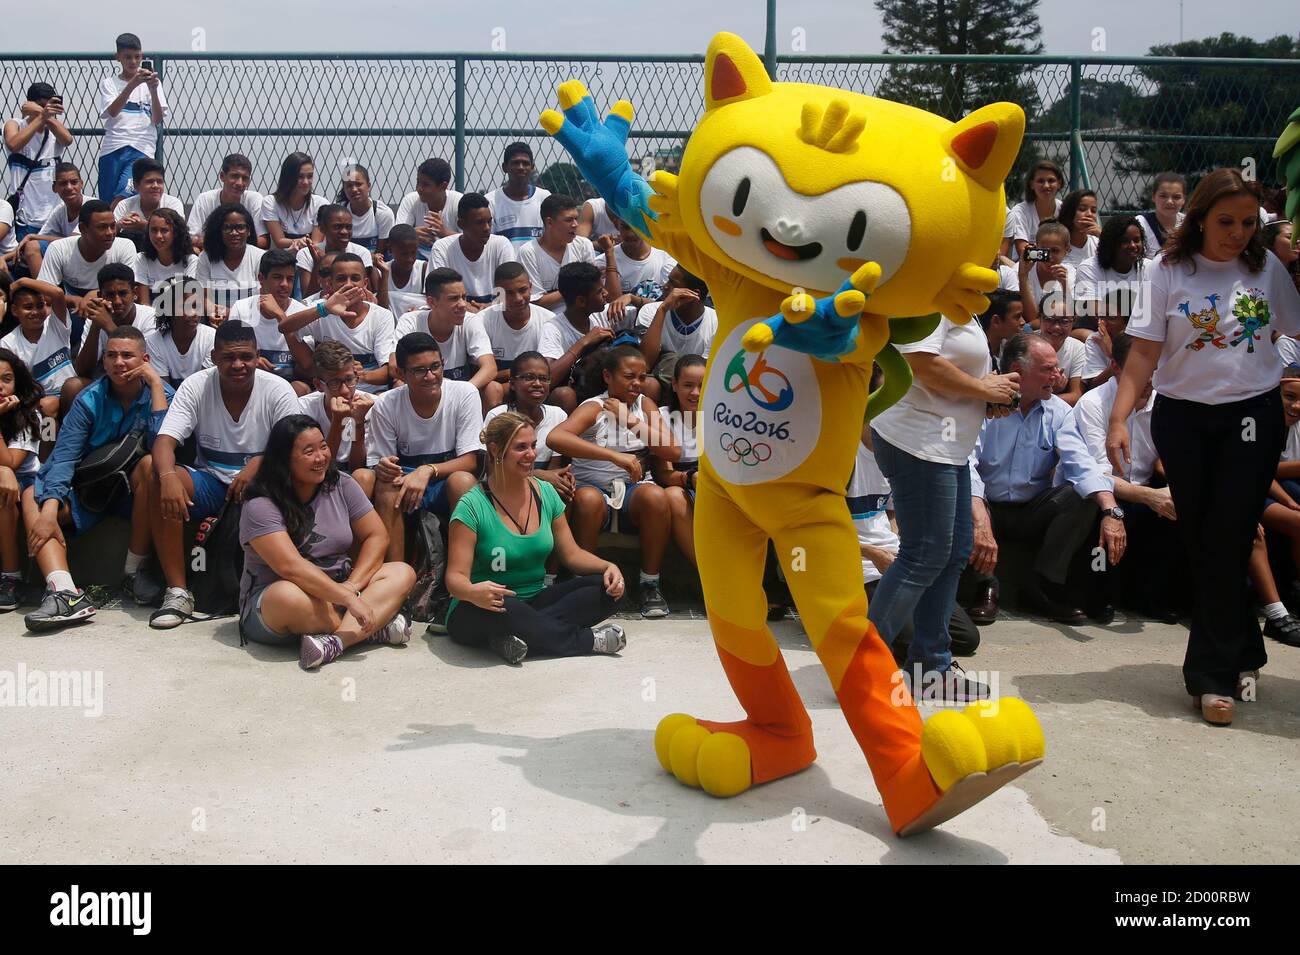 The mascot of the Rio 2016 Olympic Games is pictured during its presentation in Rio de Janeiro November 24, 2014. Bright yellow and cat-like, with a green leaf-haired brother, the mascots for the 2016 Olympics and Paralympics in Rio de Janeiro were launched by organizers late on Sunday. The mascots, who are said to represent the animals and plants of Brazil, are a key part of the Olympics merchandising campaign which is set to feature 12,000 products and is an important revenue source and a vital way of engaging the public. A public poll will be held to decide their names from a shortlist of O Stock Photo